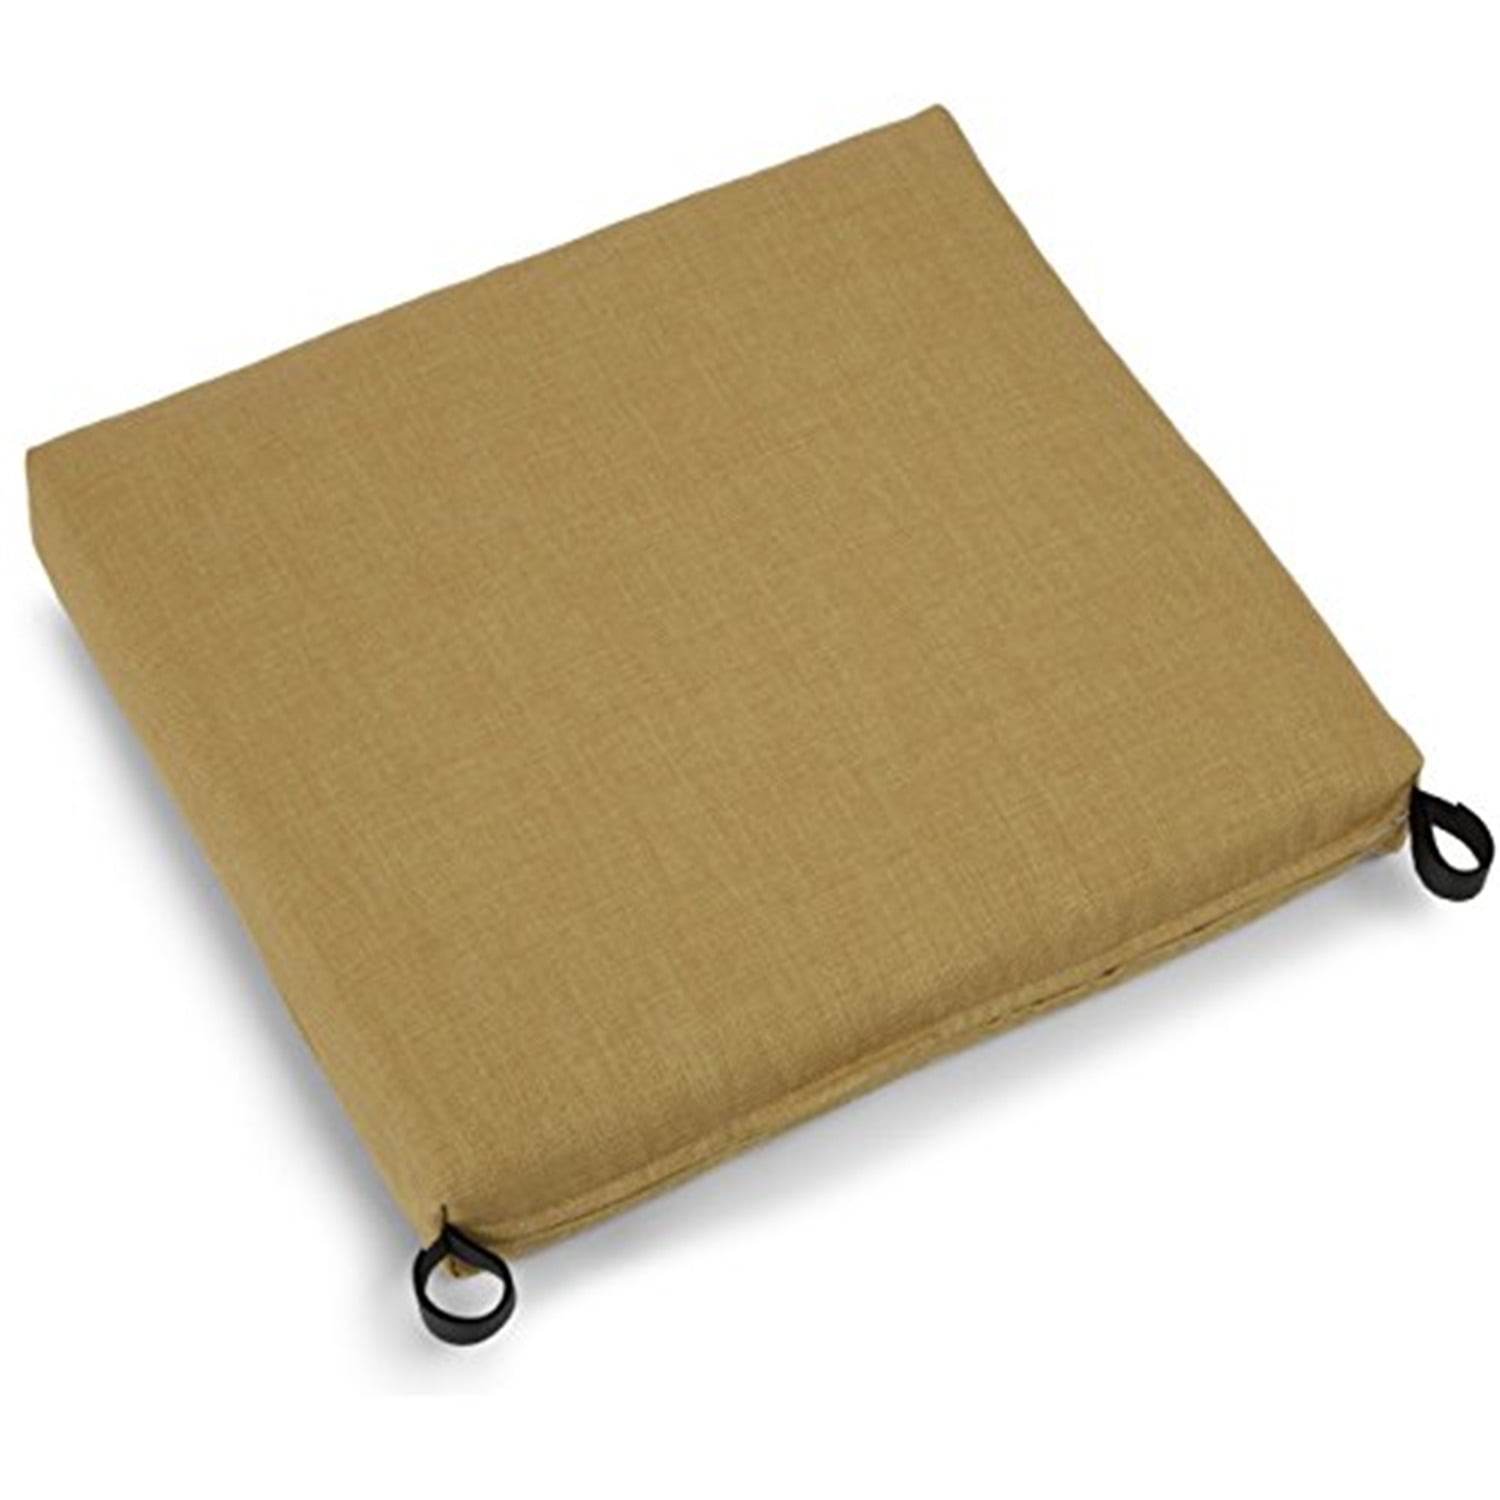 20-inch by 19-inch Spun Polyester Chair Cushion-Color:Montfleuri ...